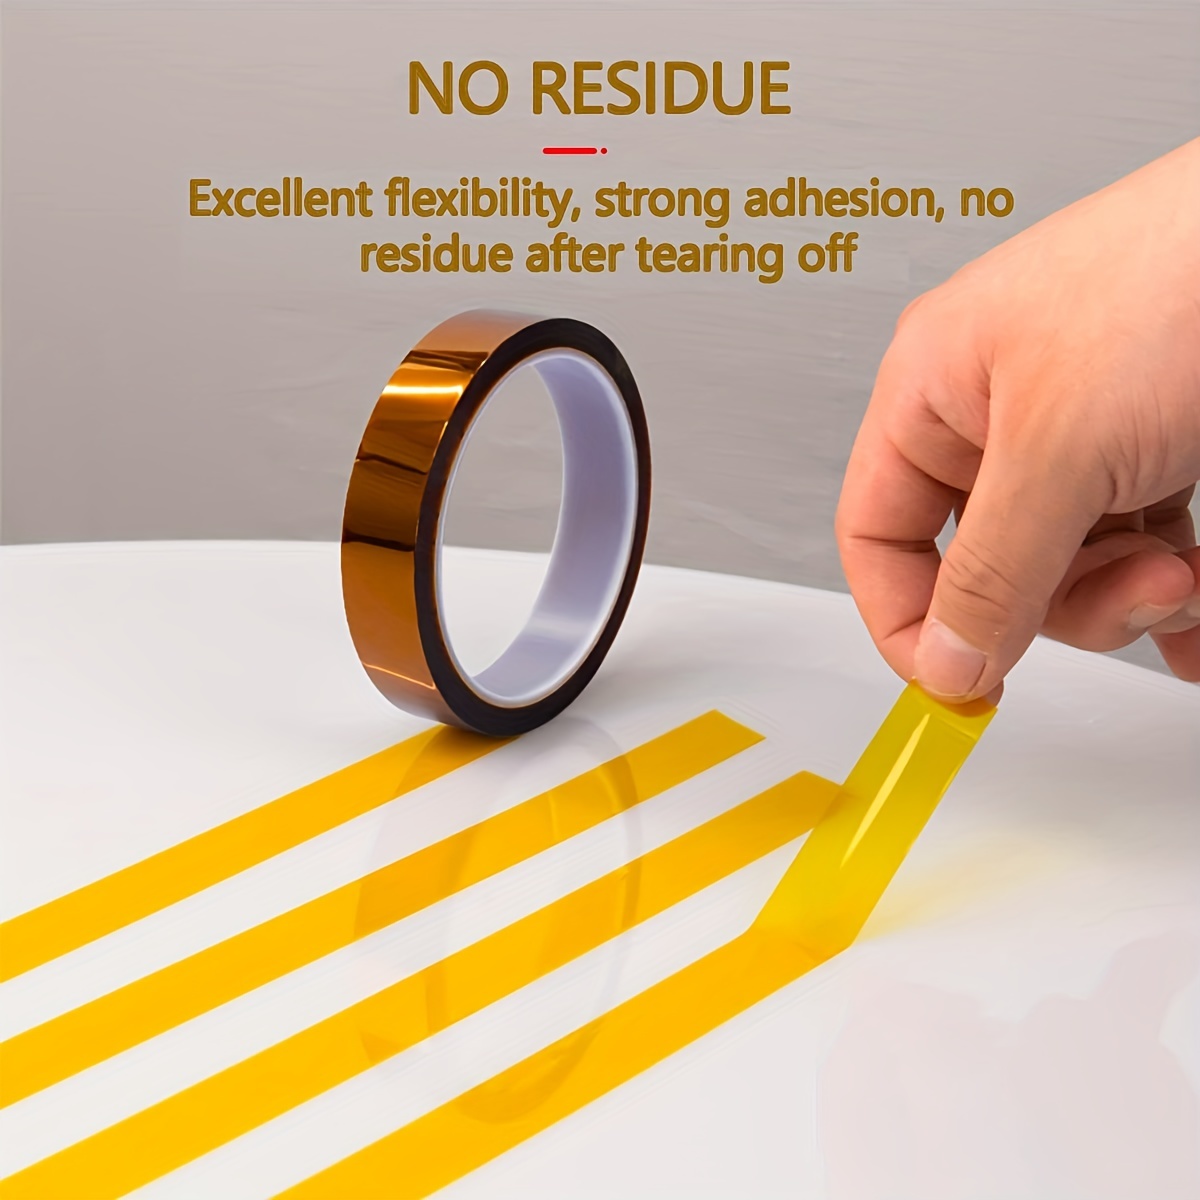 Heat Proof Thermal Tape Heat Resistant Sublimation Adhesive  5/10/15/20/30mm*33m